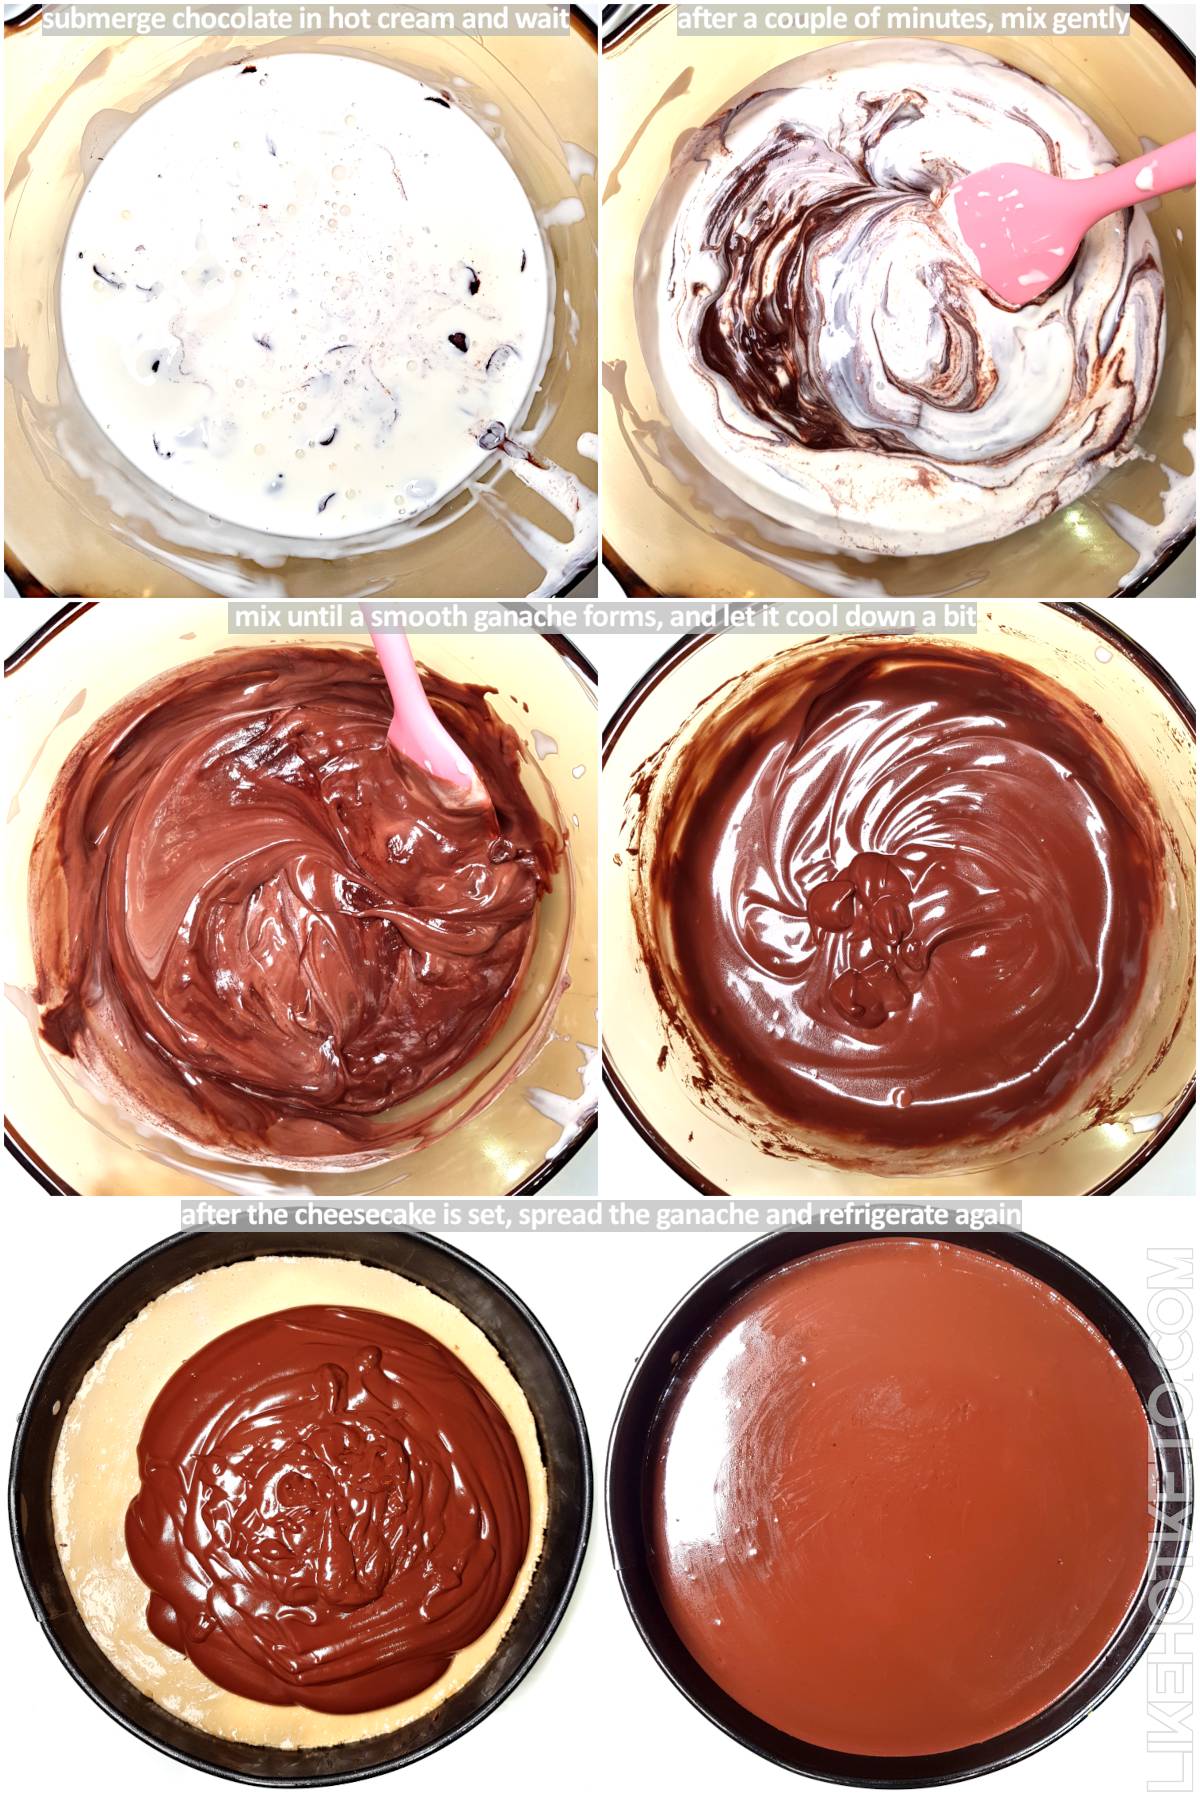 A six photo sequence showing how to make the sugar-free chocolate ganache topping, heating the cream, melting the chocolate and mixing, and the resulting creamy ganache topping the cheesecake.